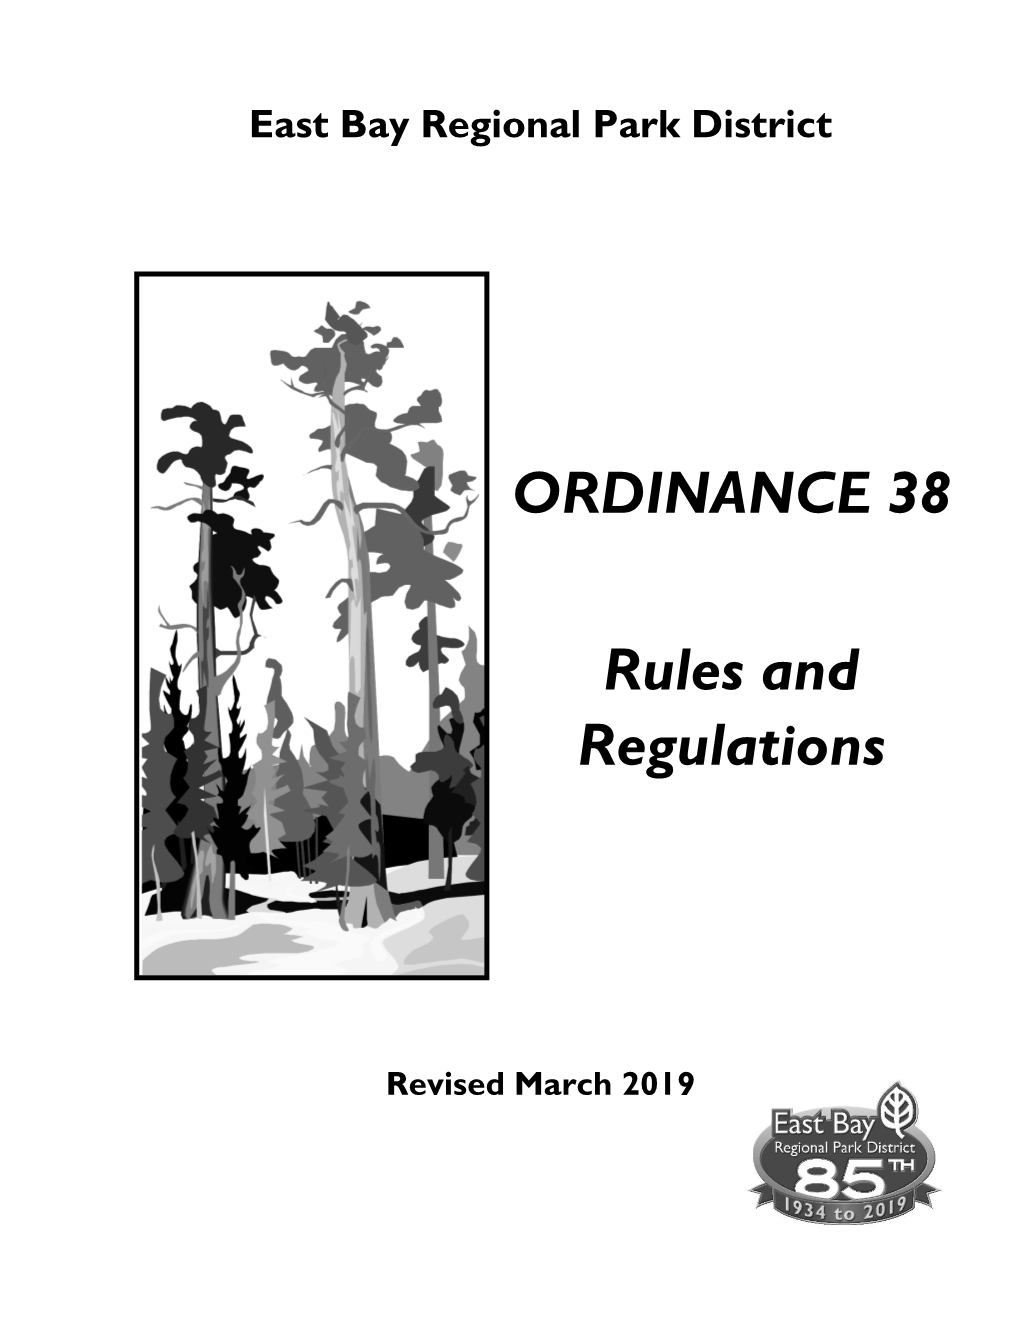 ORDINANCE 38 Rules and Regulations